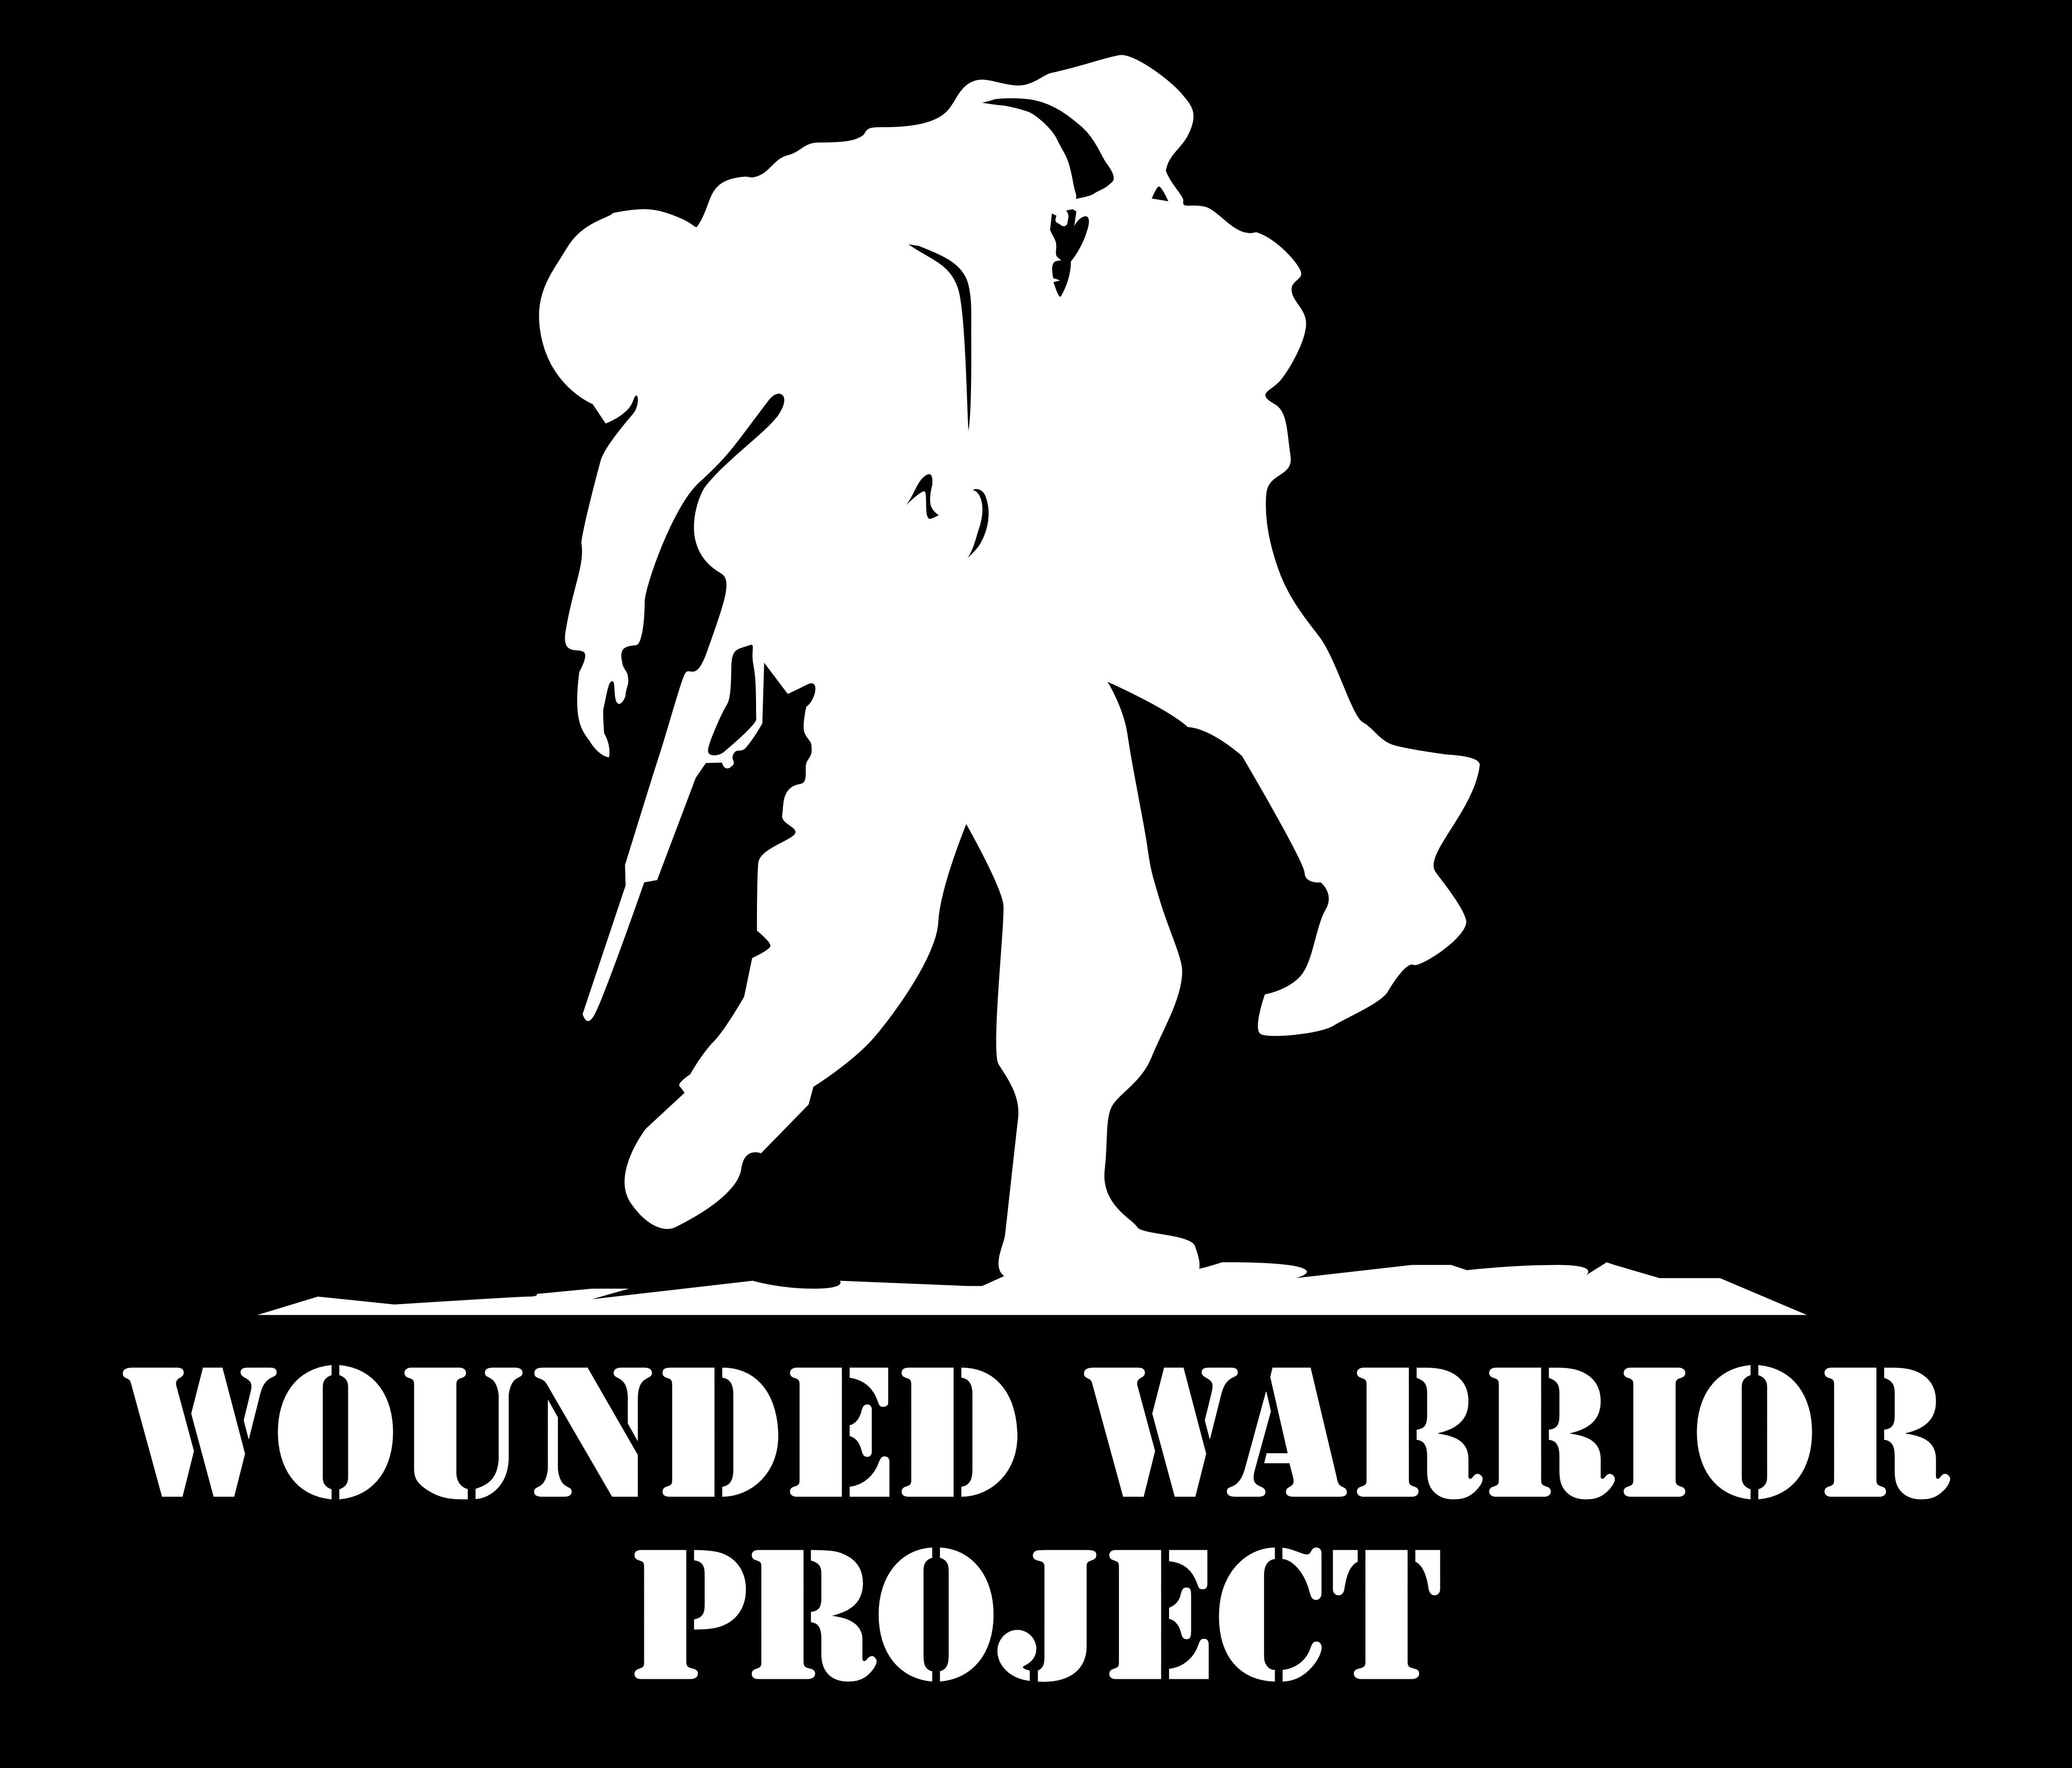 Wounded warrior project Logos